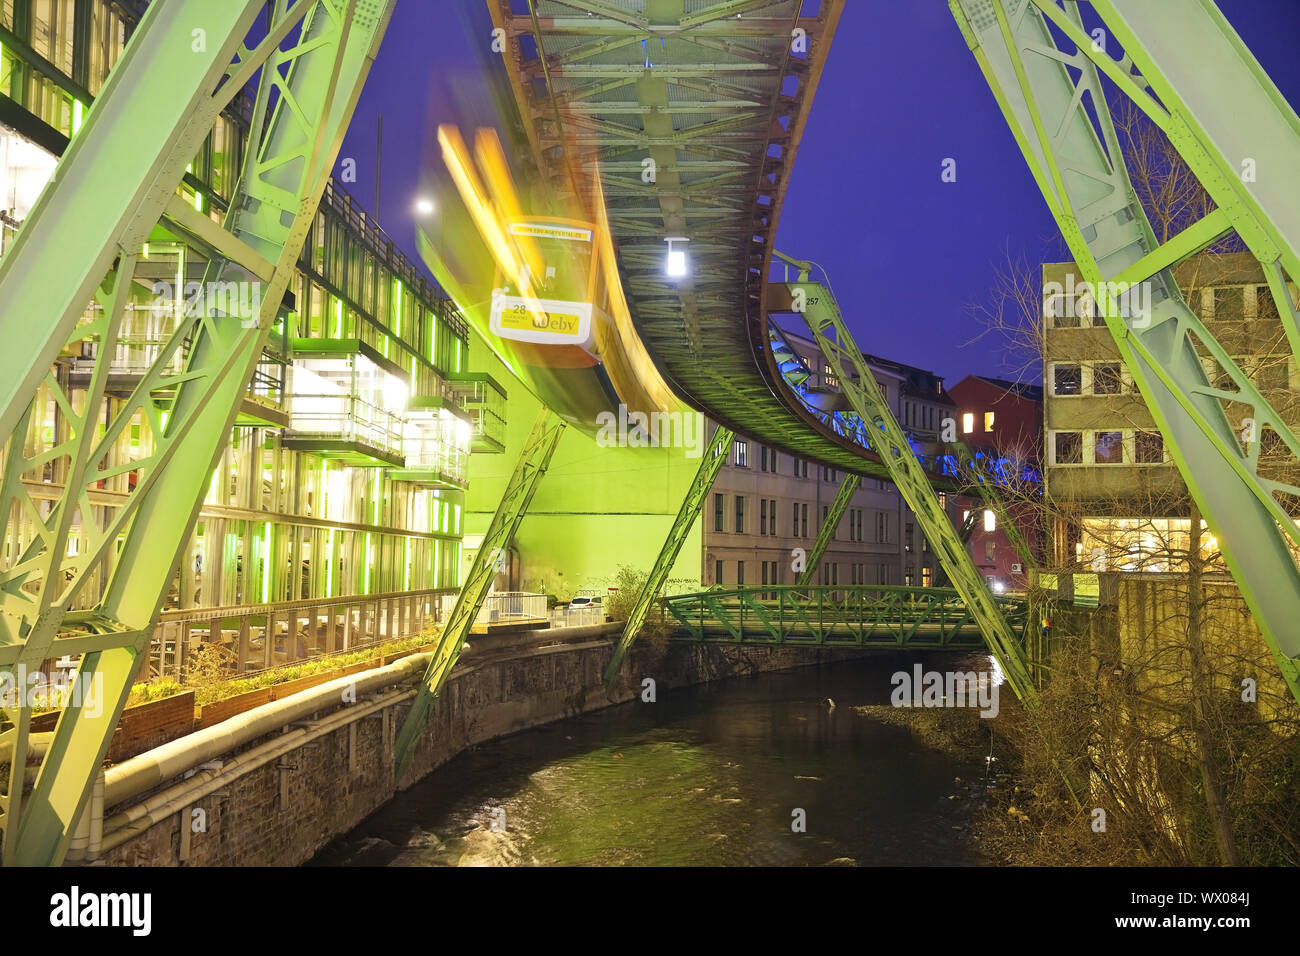 uspension railway in motion over the river Wupper at night, Wuppertal, Germany, Europe Stock Photo